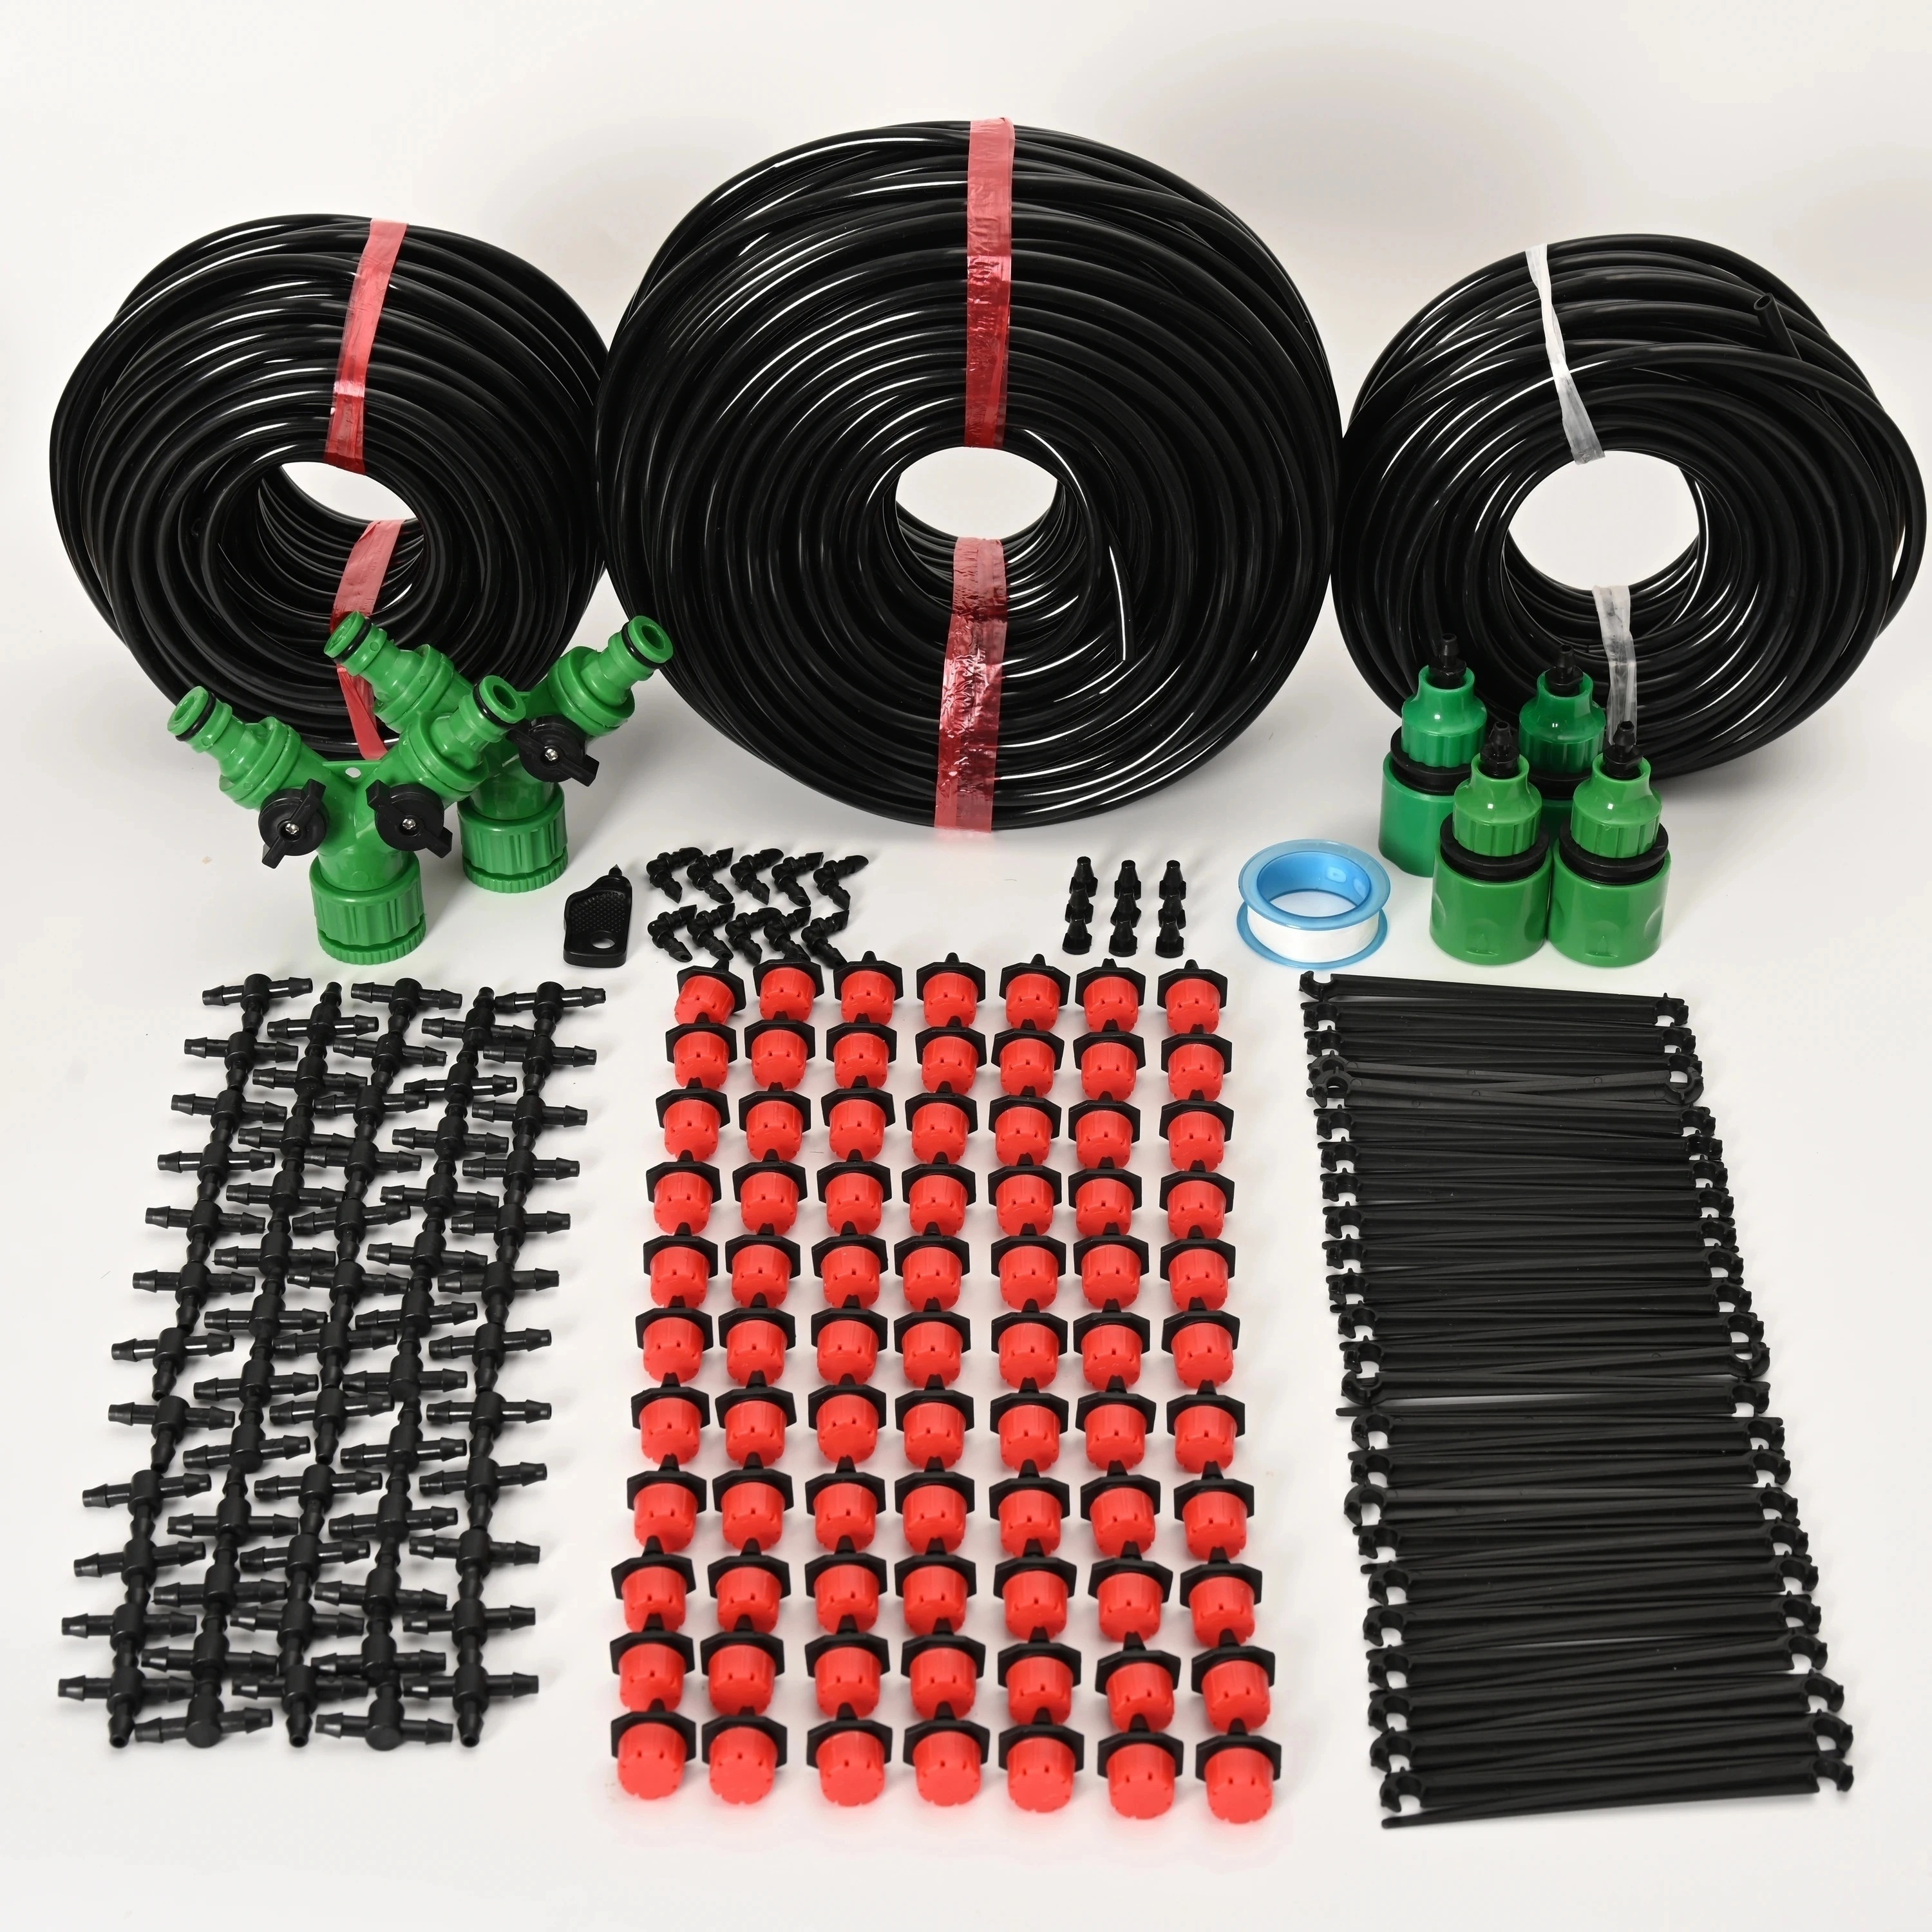 

1pack Drip Irrigation System Plant Watering Set Watering Kits Adjustable Drippers For Irrigation Micro Garden Watering System (5/10/15/20/25/30m)